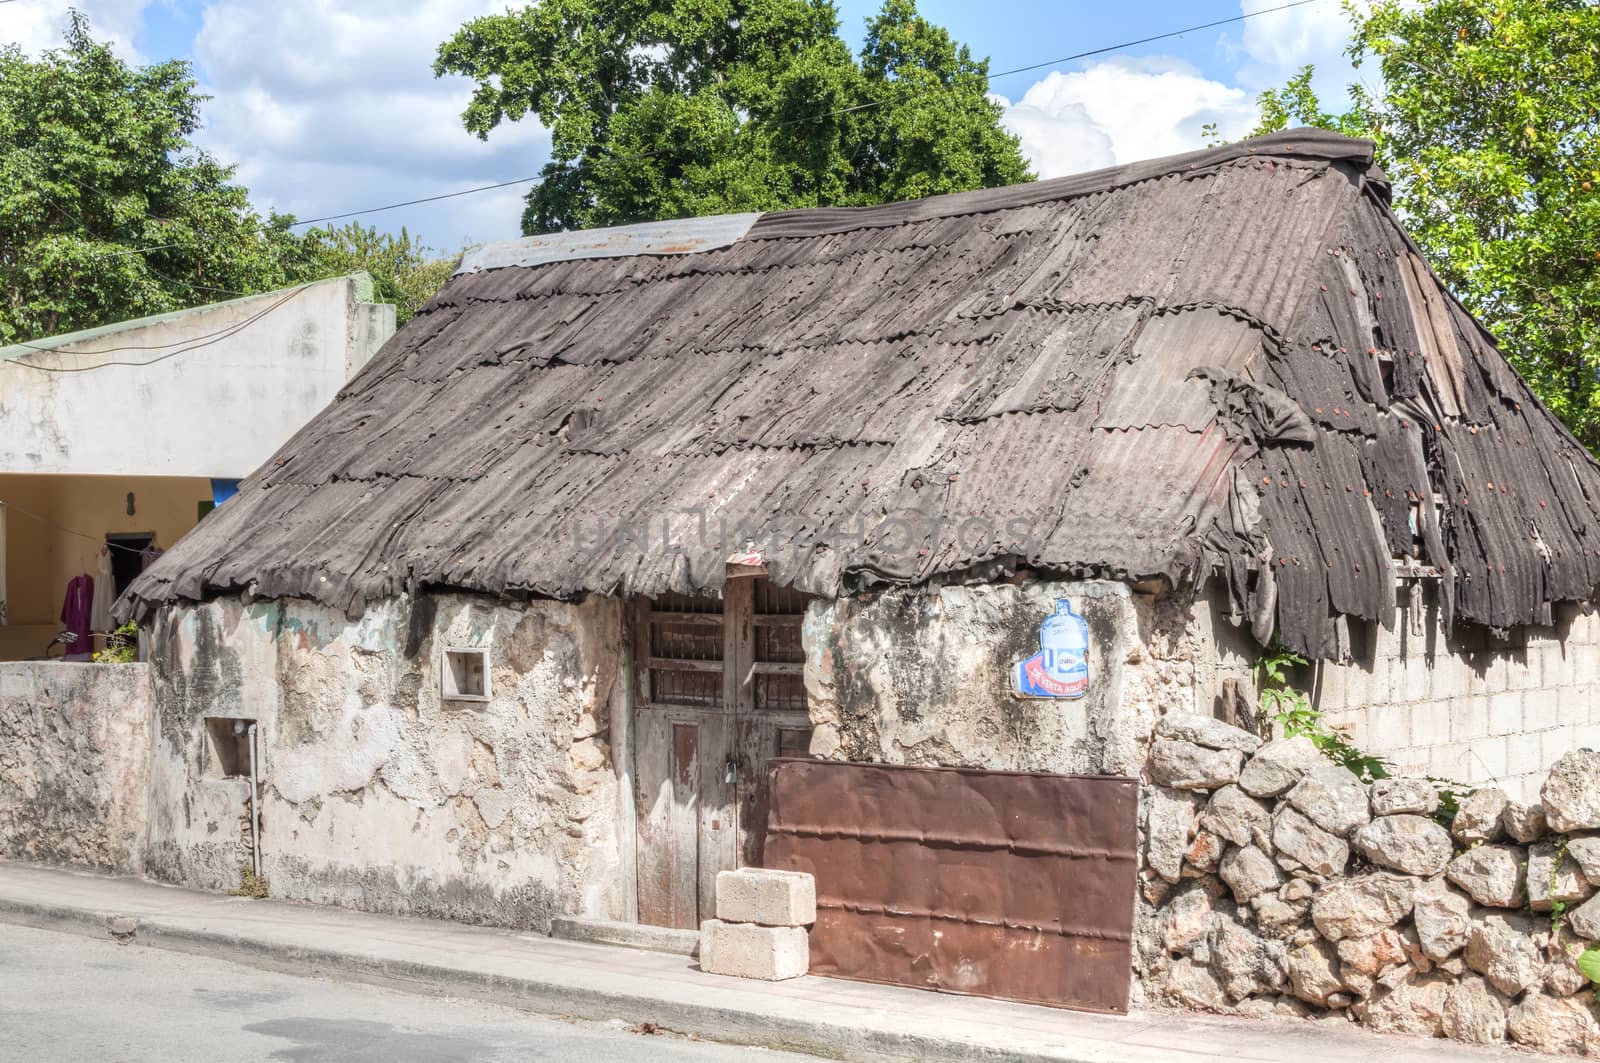 VALLADOLID, MEXICO - JANUARY 20, 2015: Obvious signs of wear are visible on this block and stucco home with rusty worn corrugated metal roof in Valladolid, Yucatan